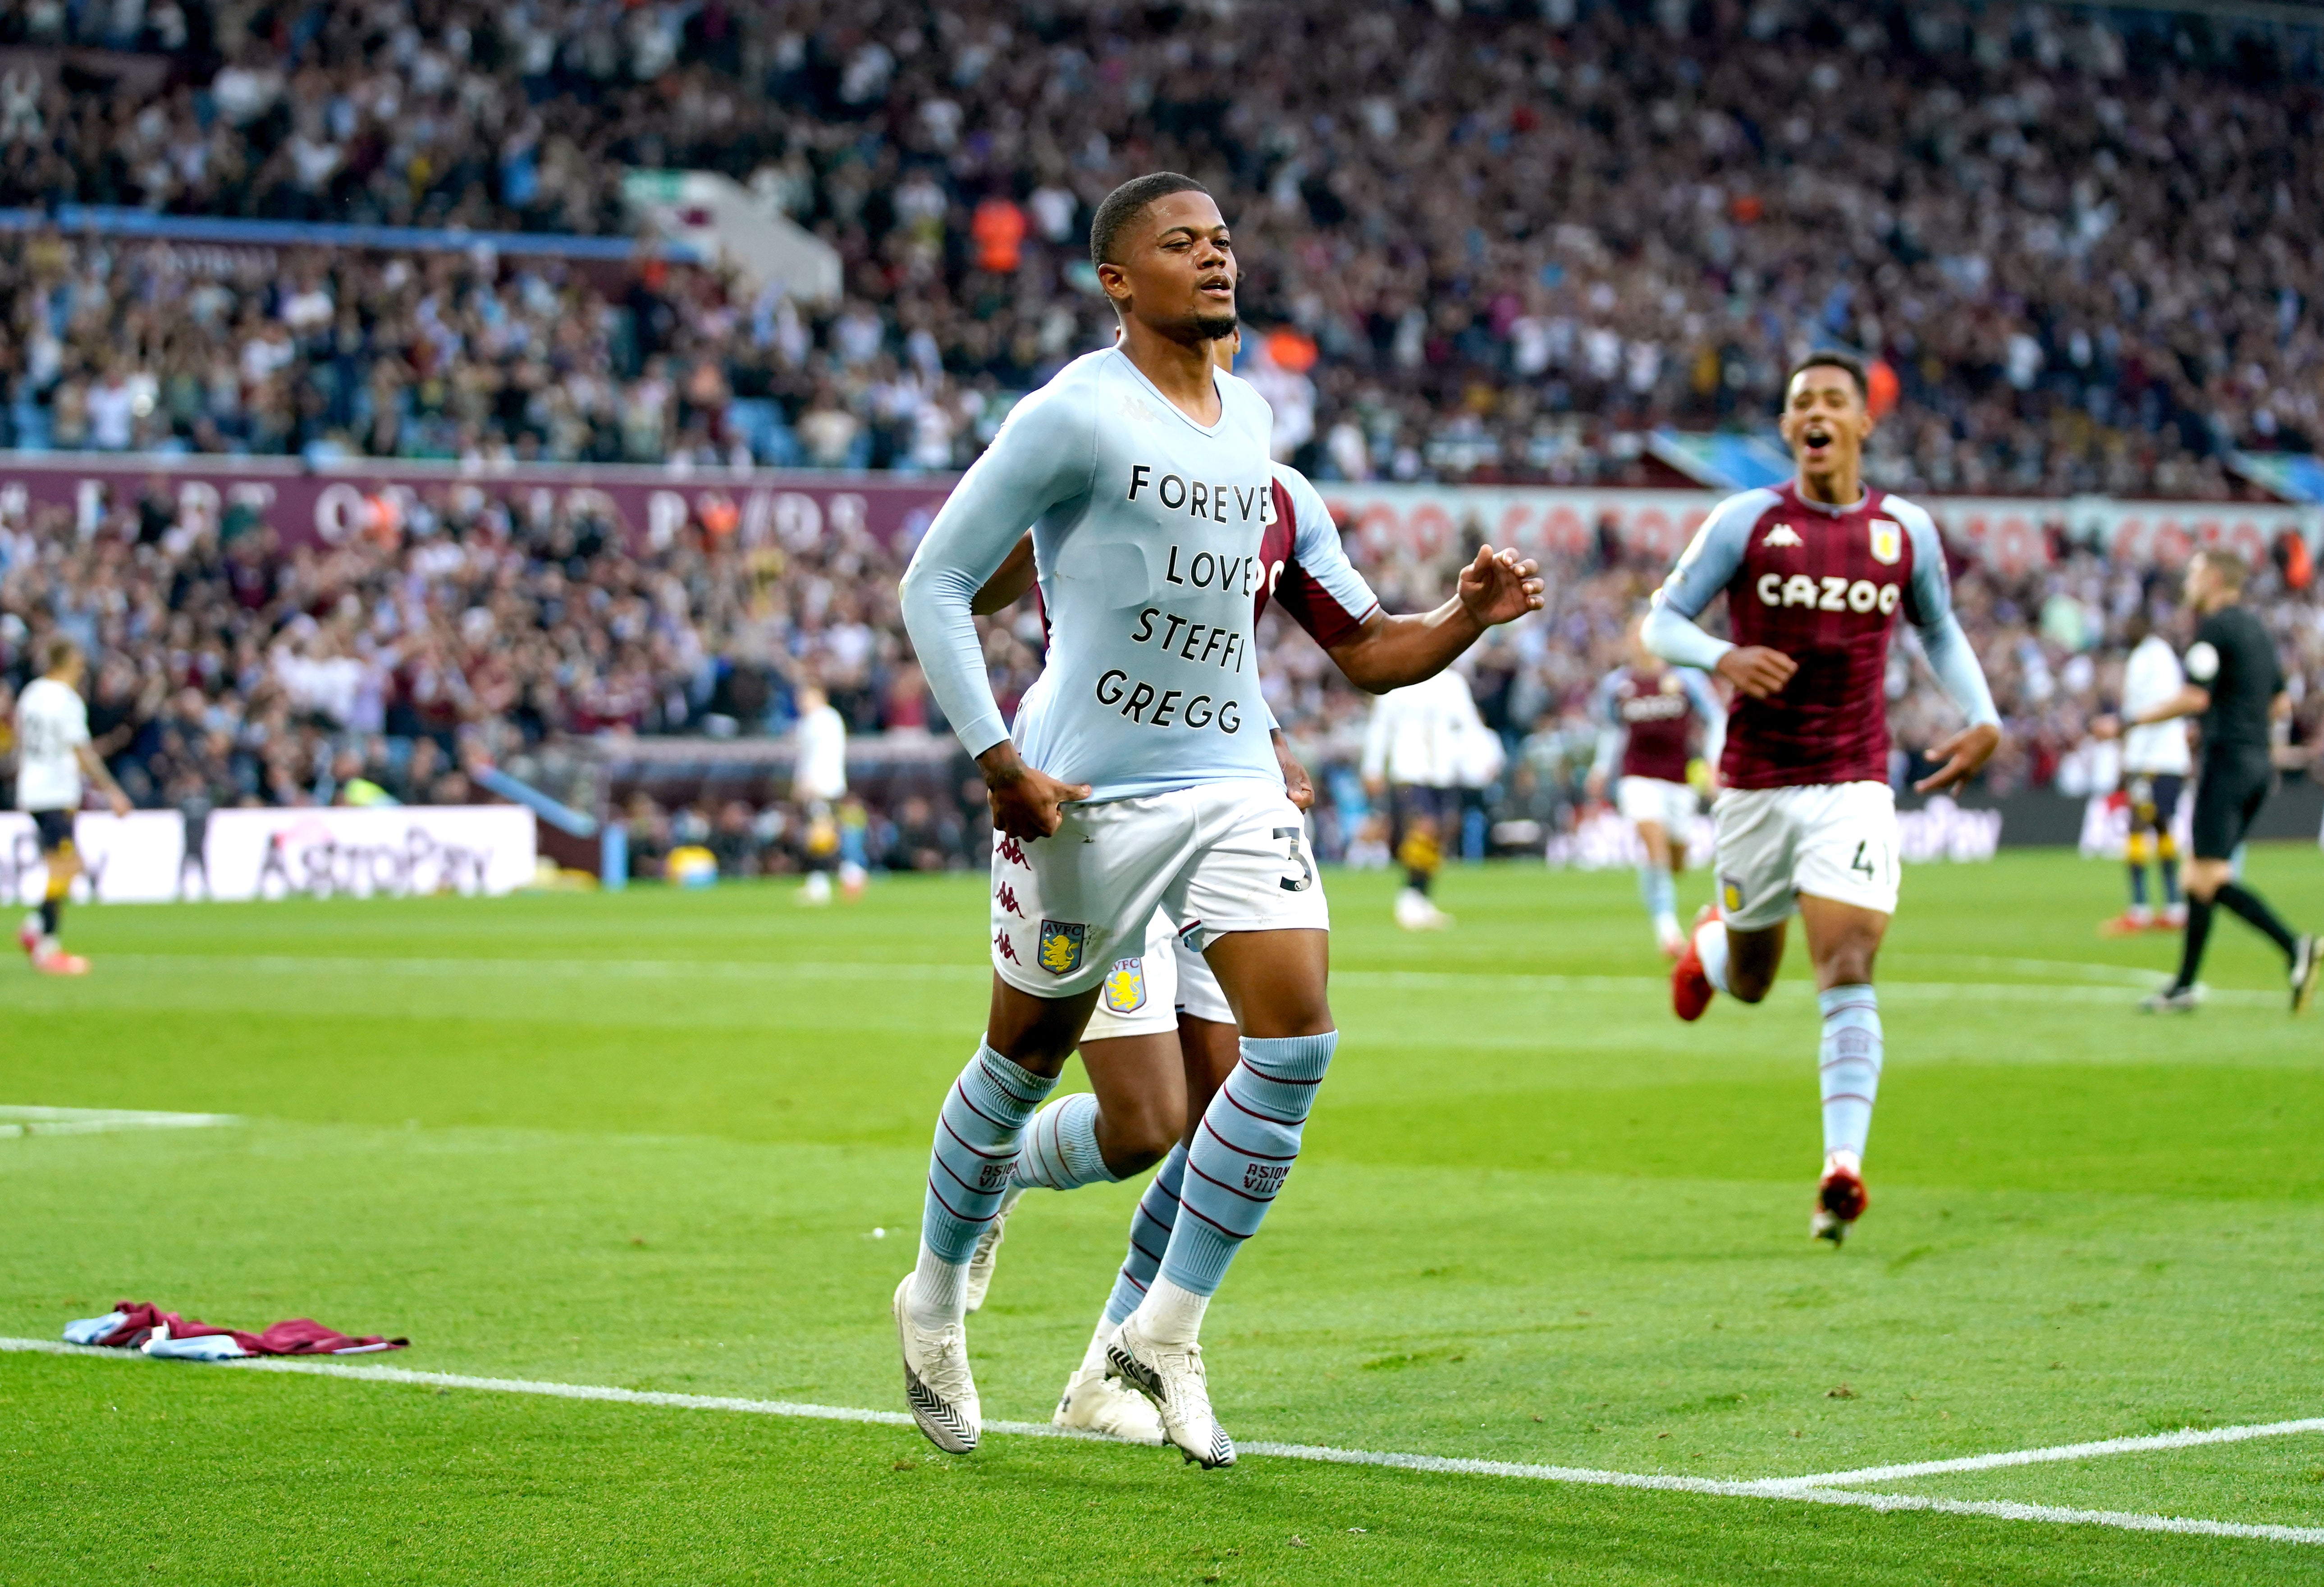 Aston Villa’s Leon Bailey scored his first goal for the club against Everton. (Tim Goode/PA)